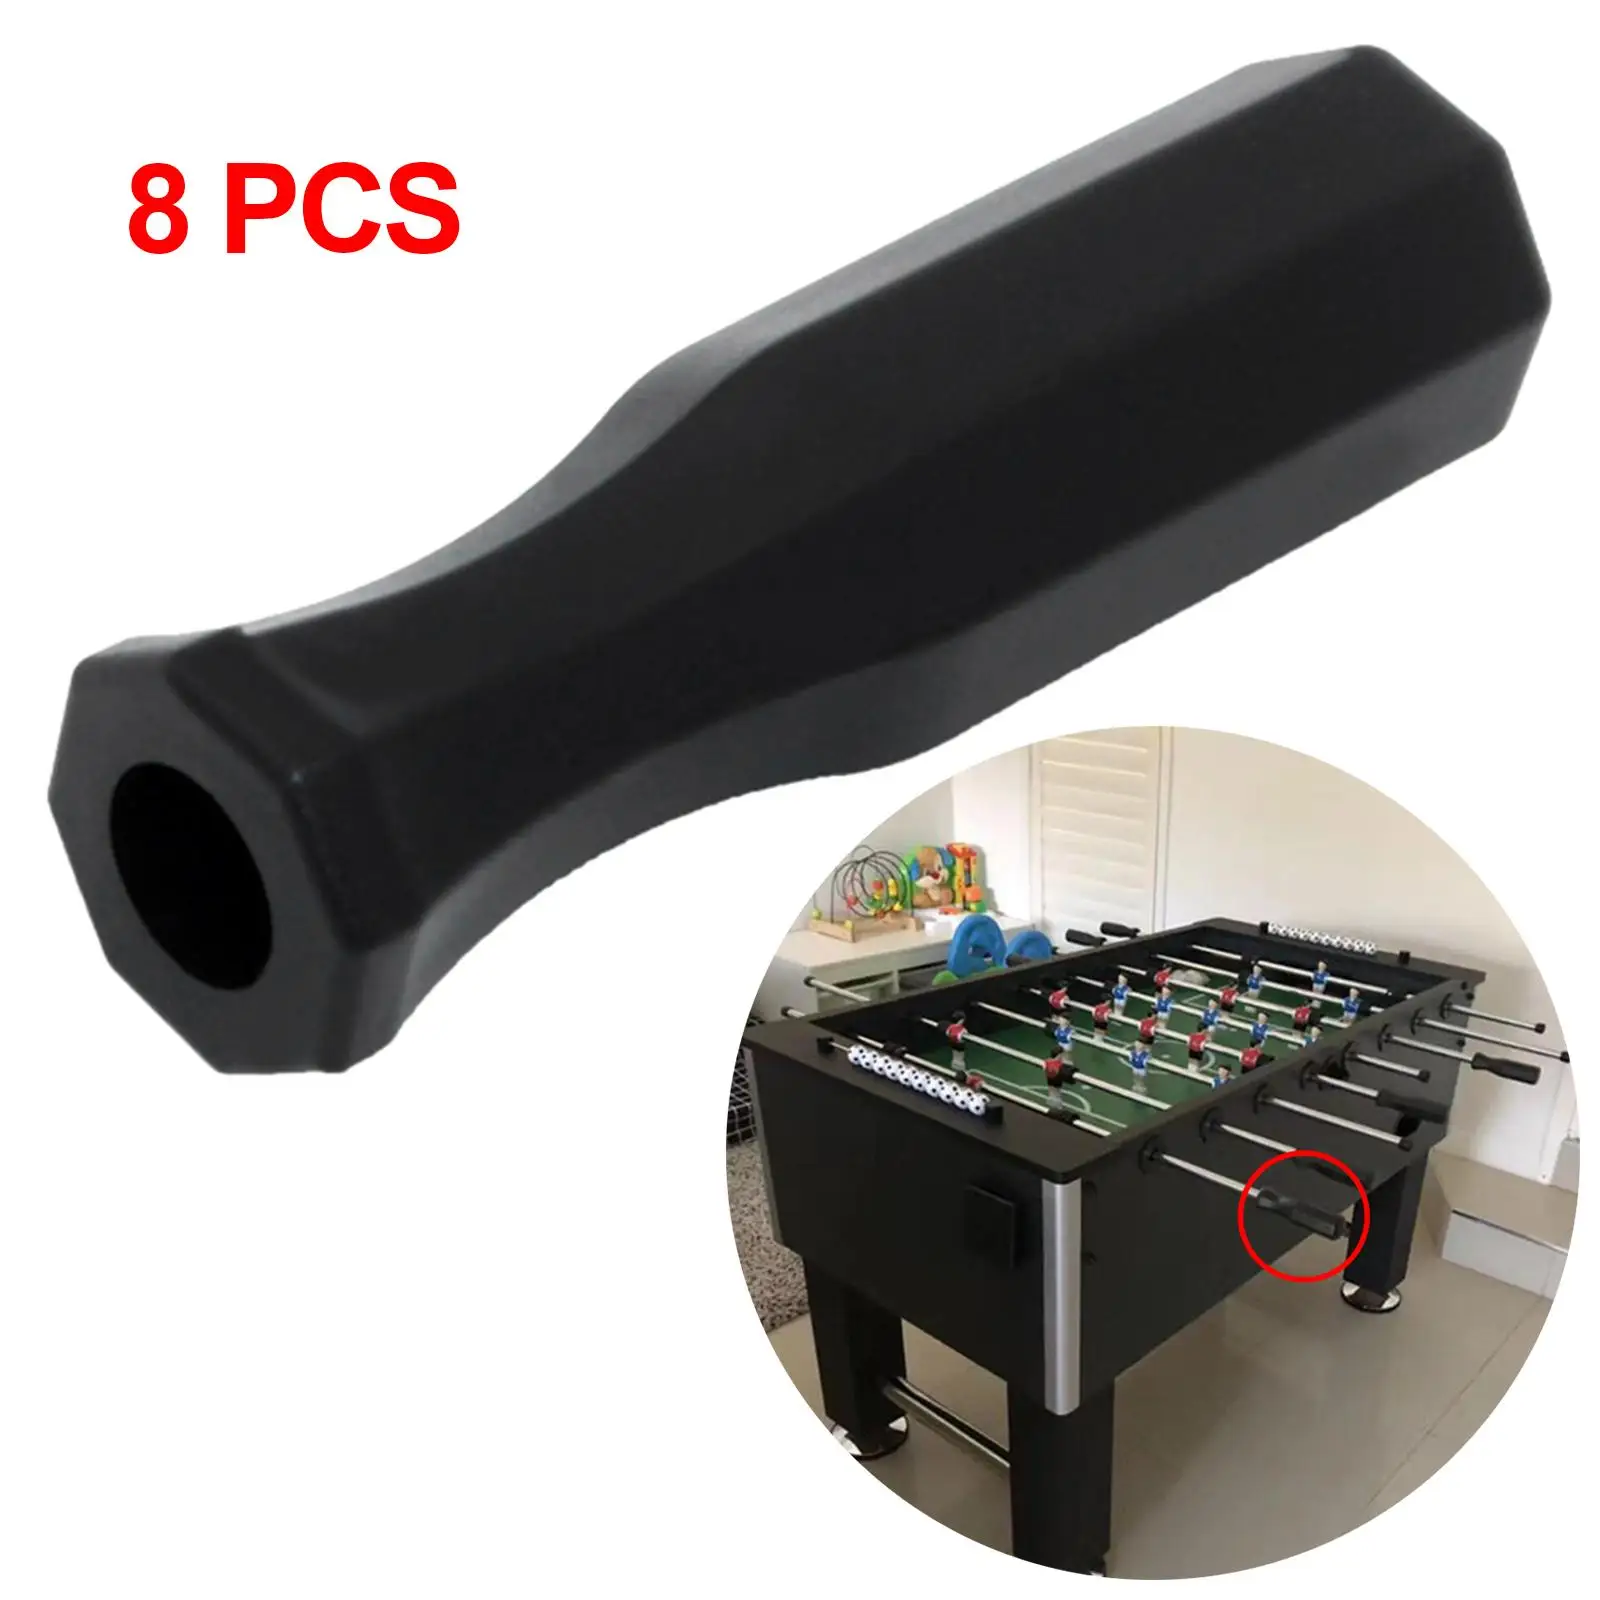 Foosball Handle Grips-8 Pcs Octagonal Handles, which can Replace The Foosball Accessories of 5/8 inch Standard Football Tables